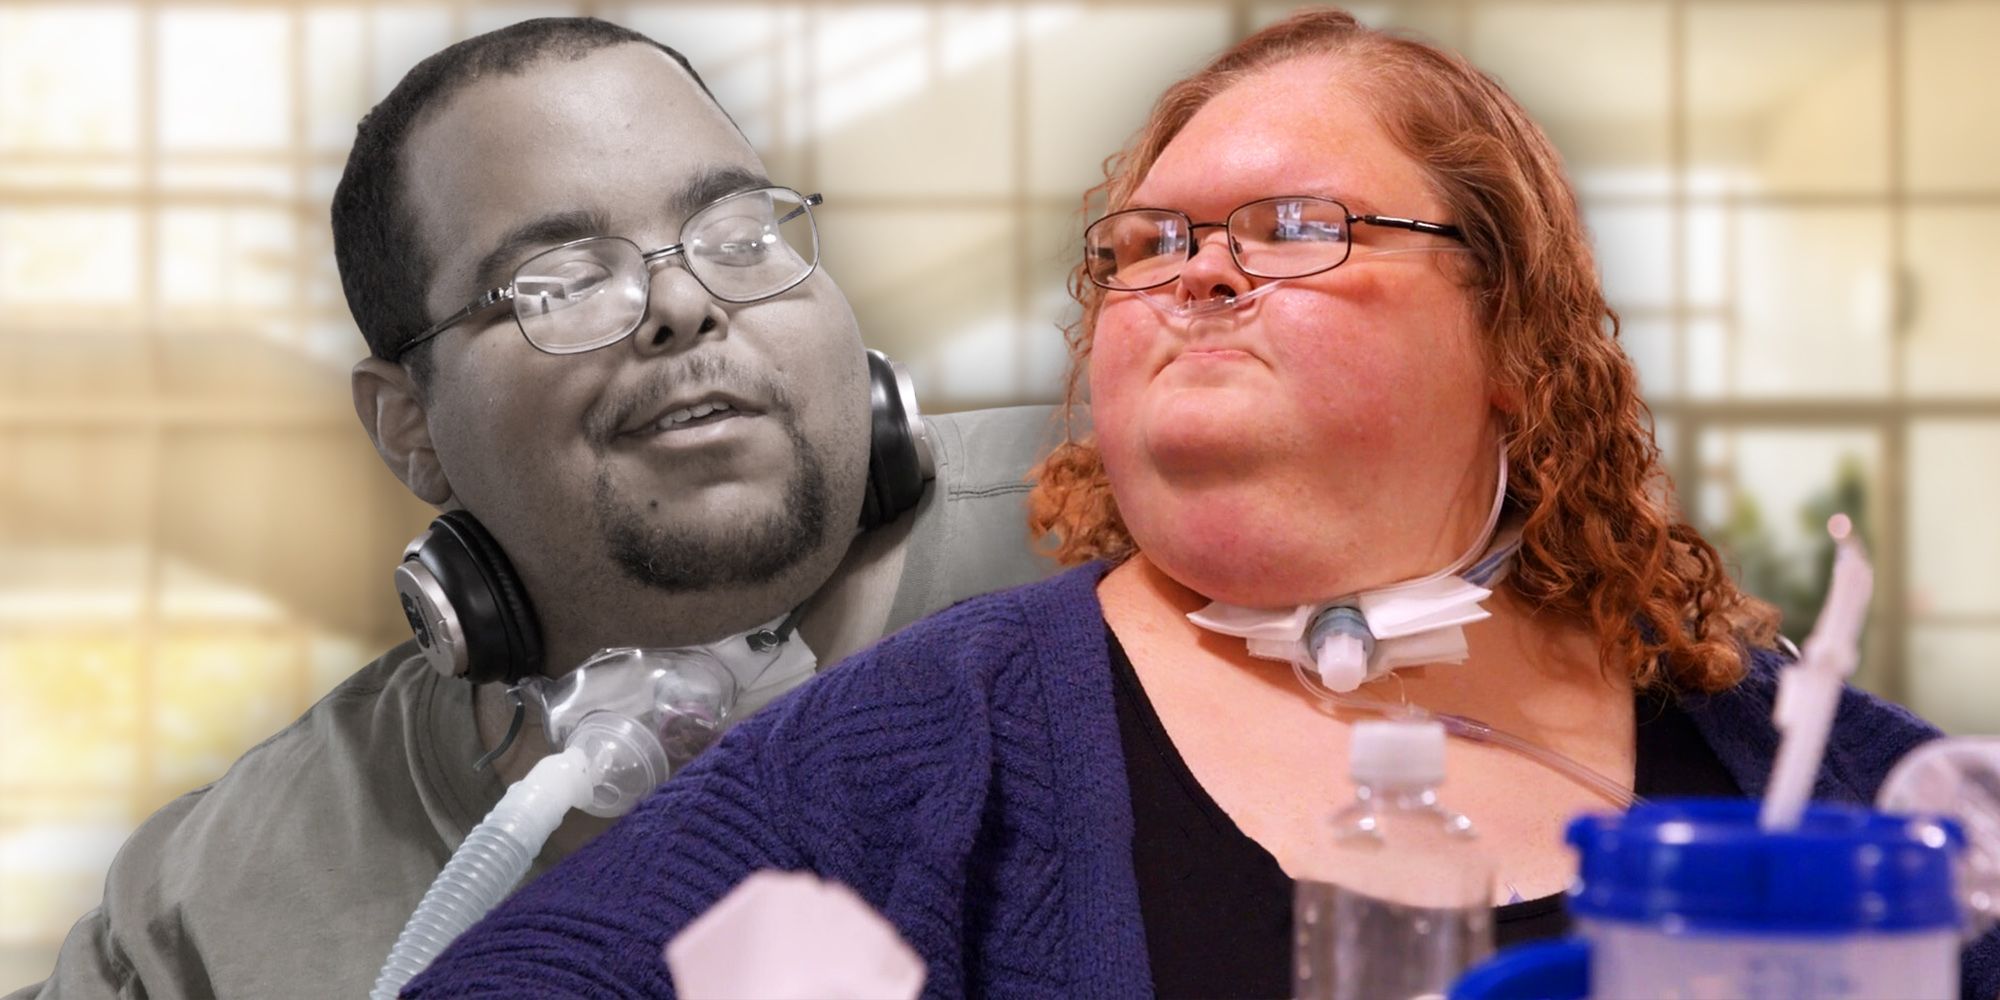 Side by side images of Tammy Slaton and Caleb Willingham from 1000-Lb Sisters